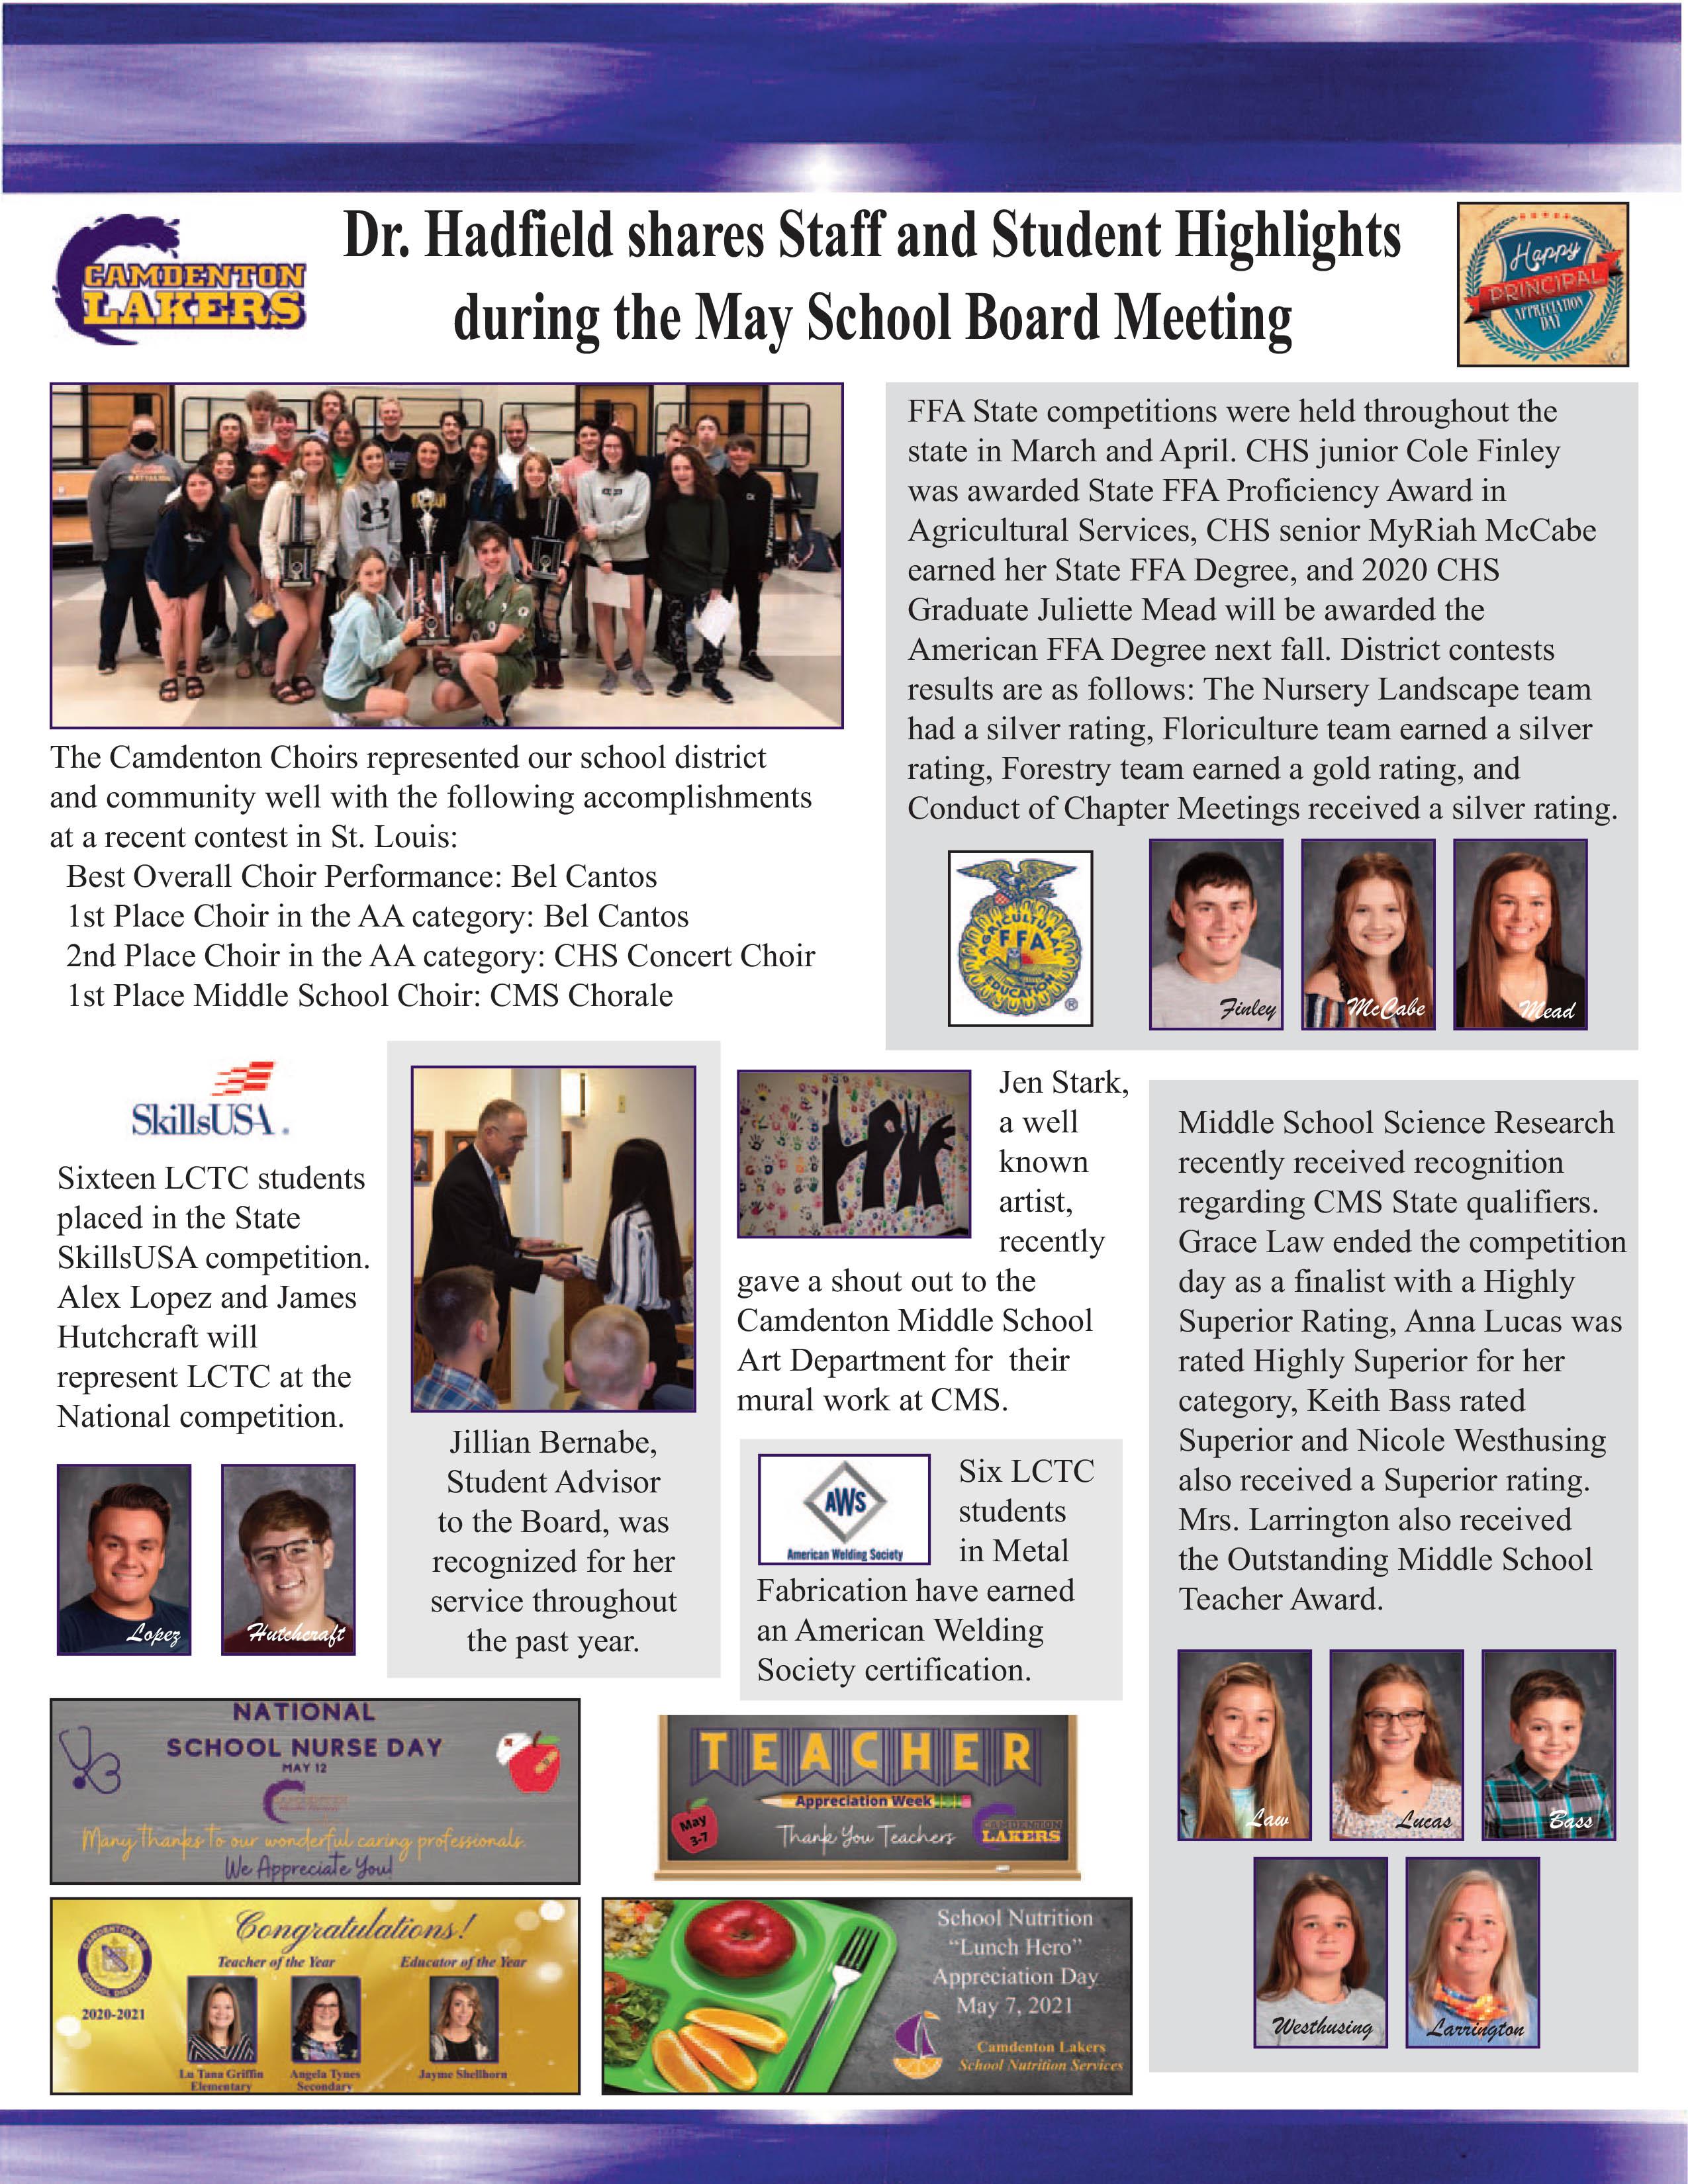 May Board Meeting - Staff and Students Highlights